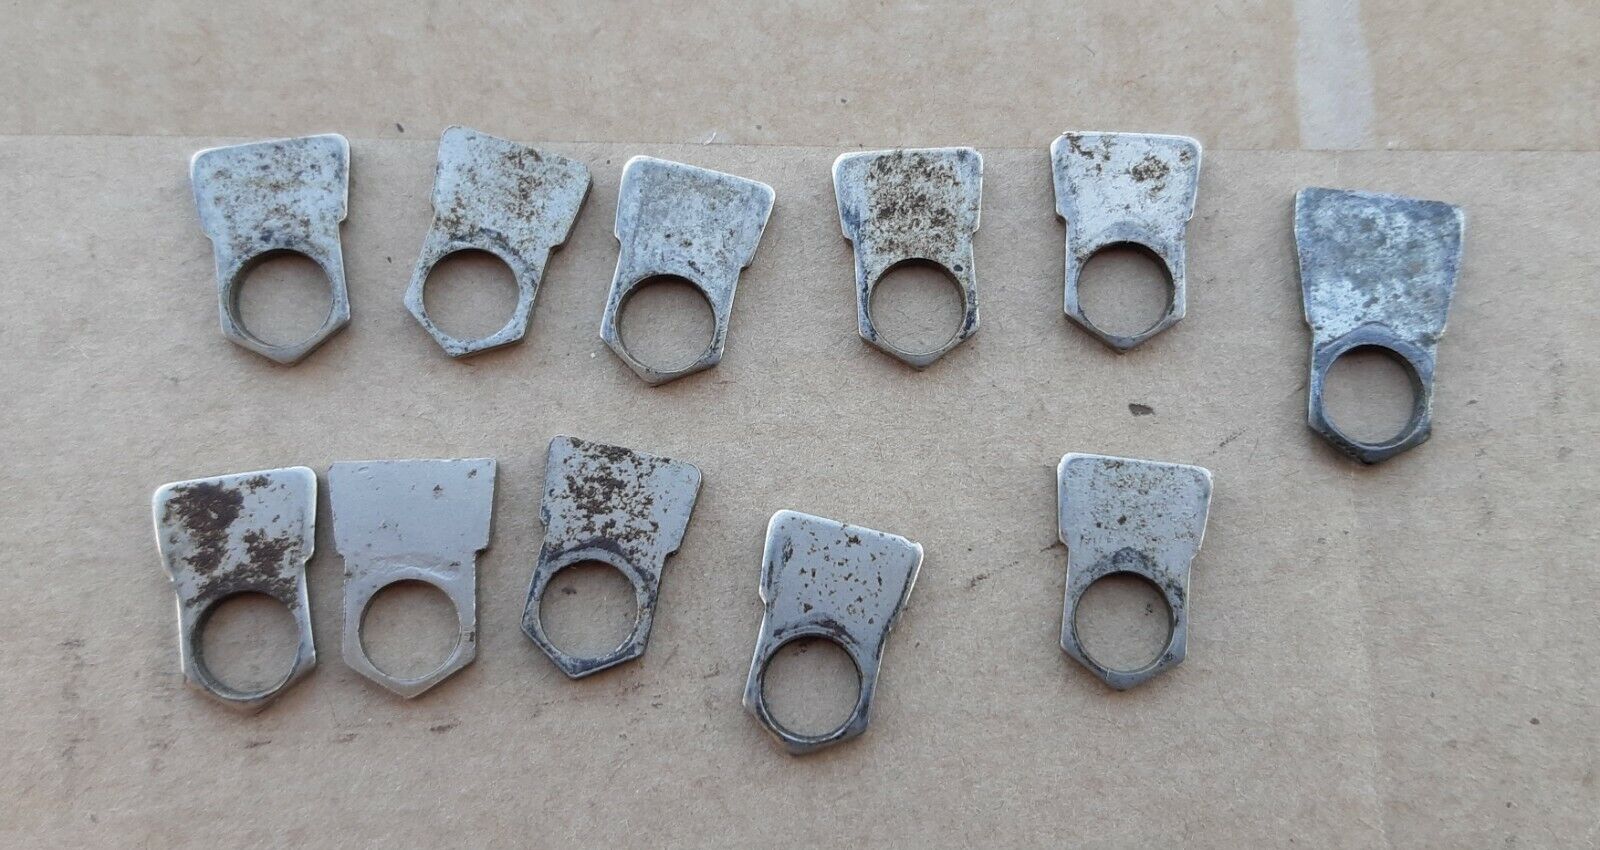 Vintage Premier drums lug inserts holders, 11 pieces, FREE SHIPPING